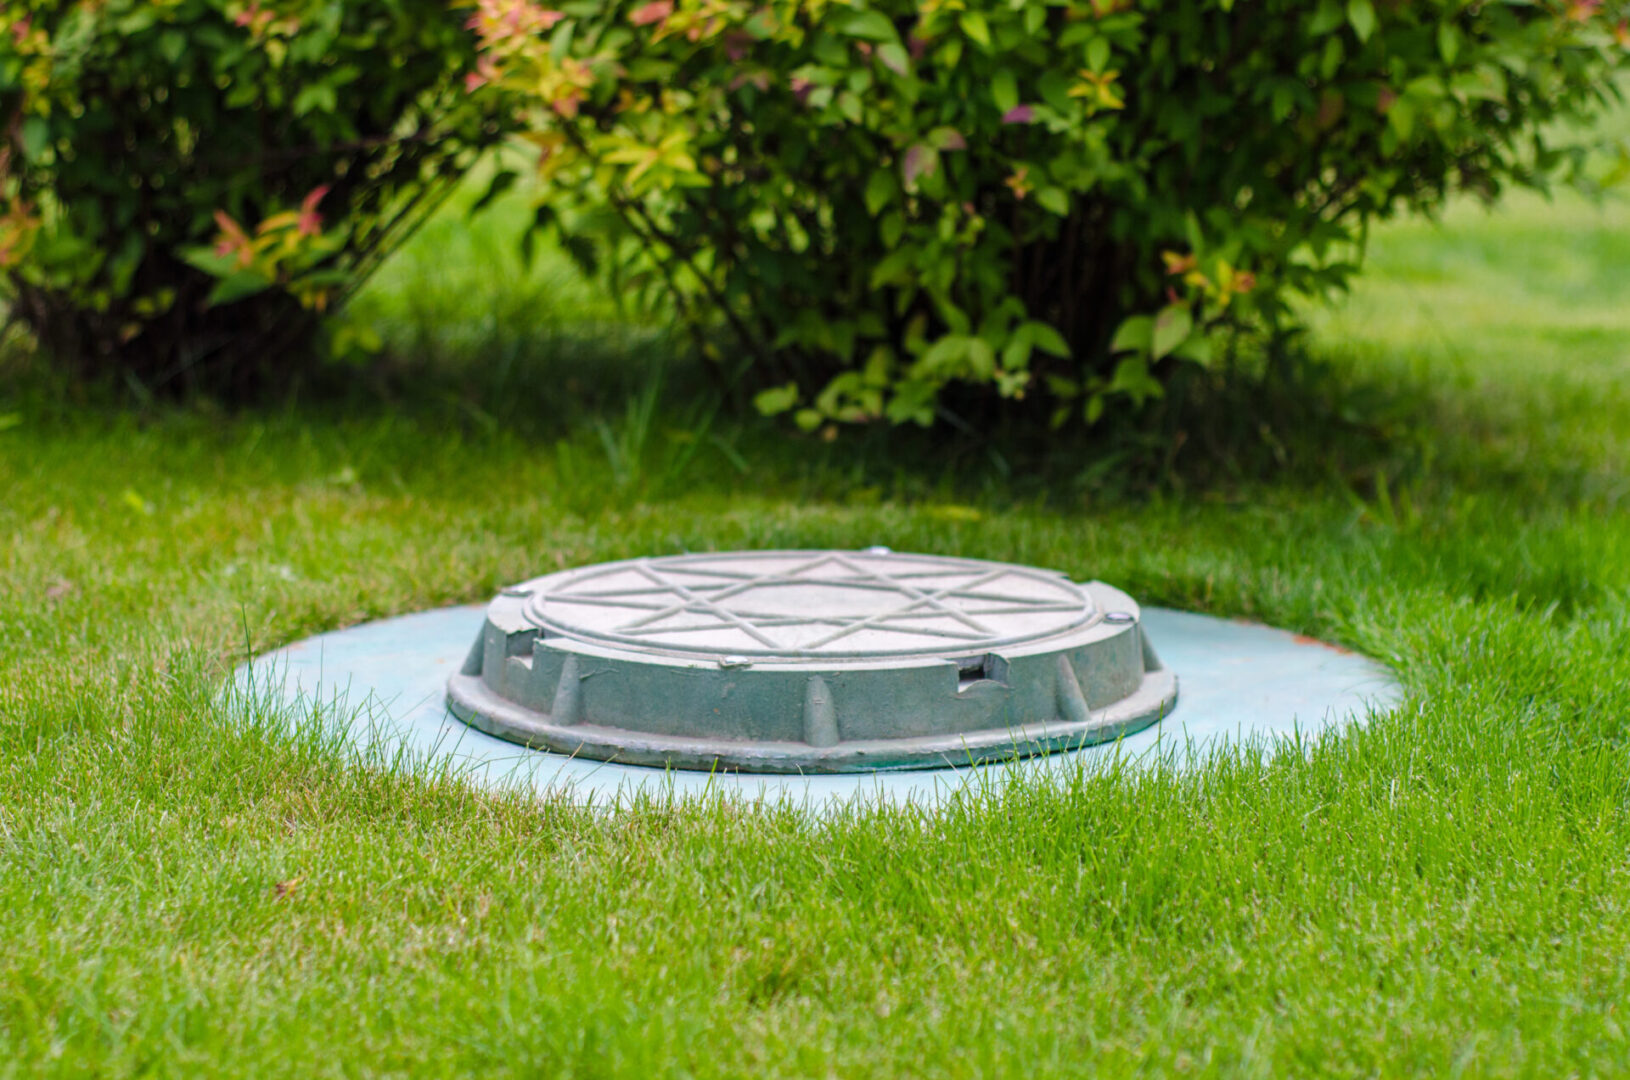 A manhole cover in the middle of a garden.